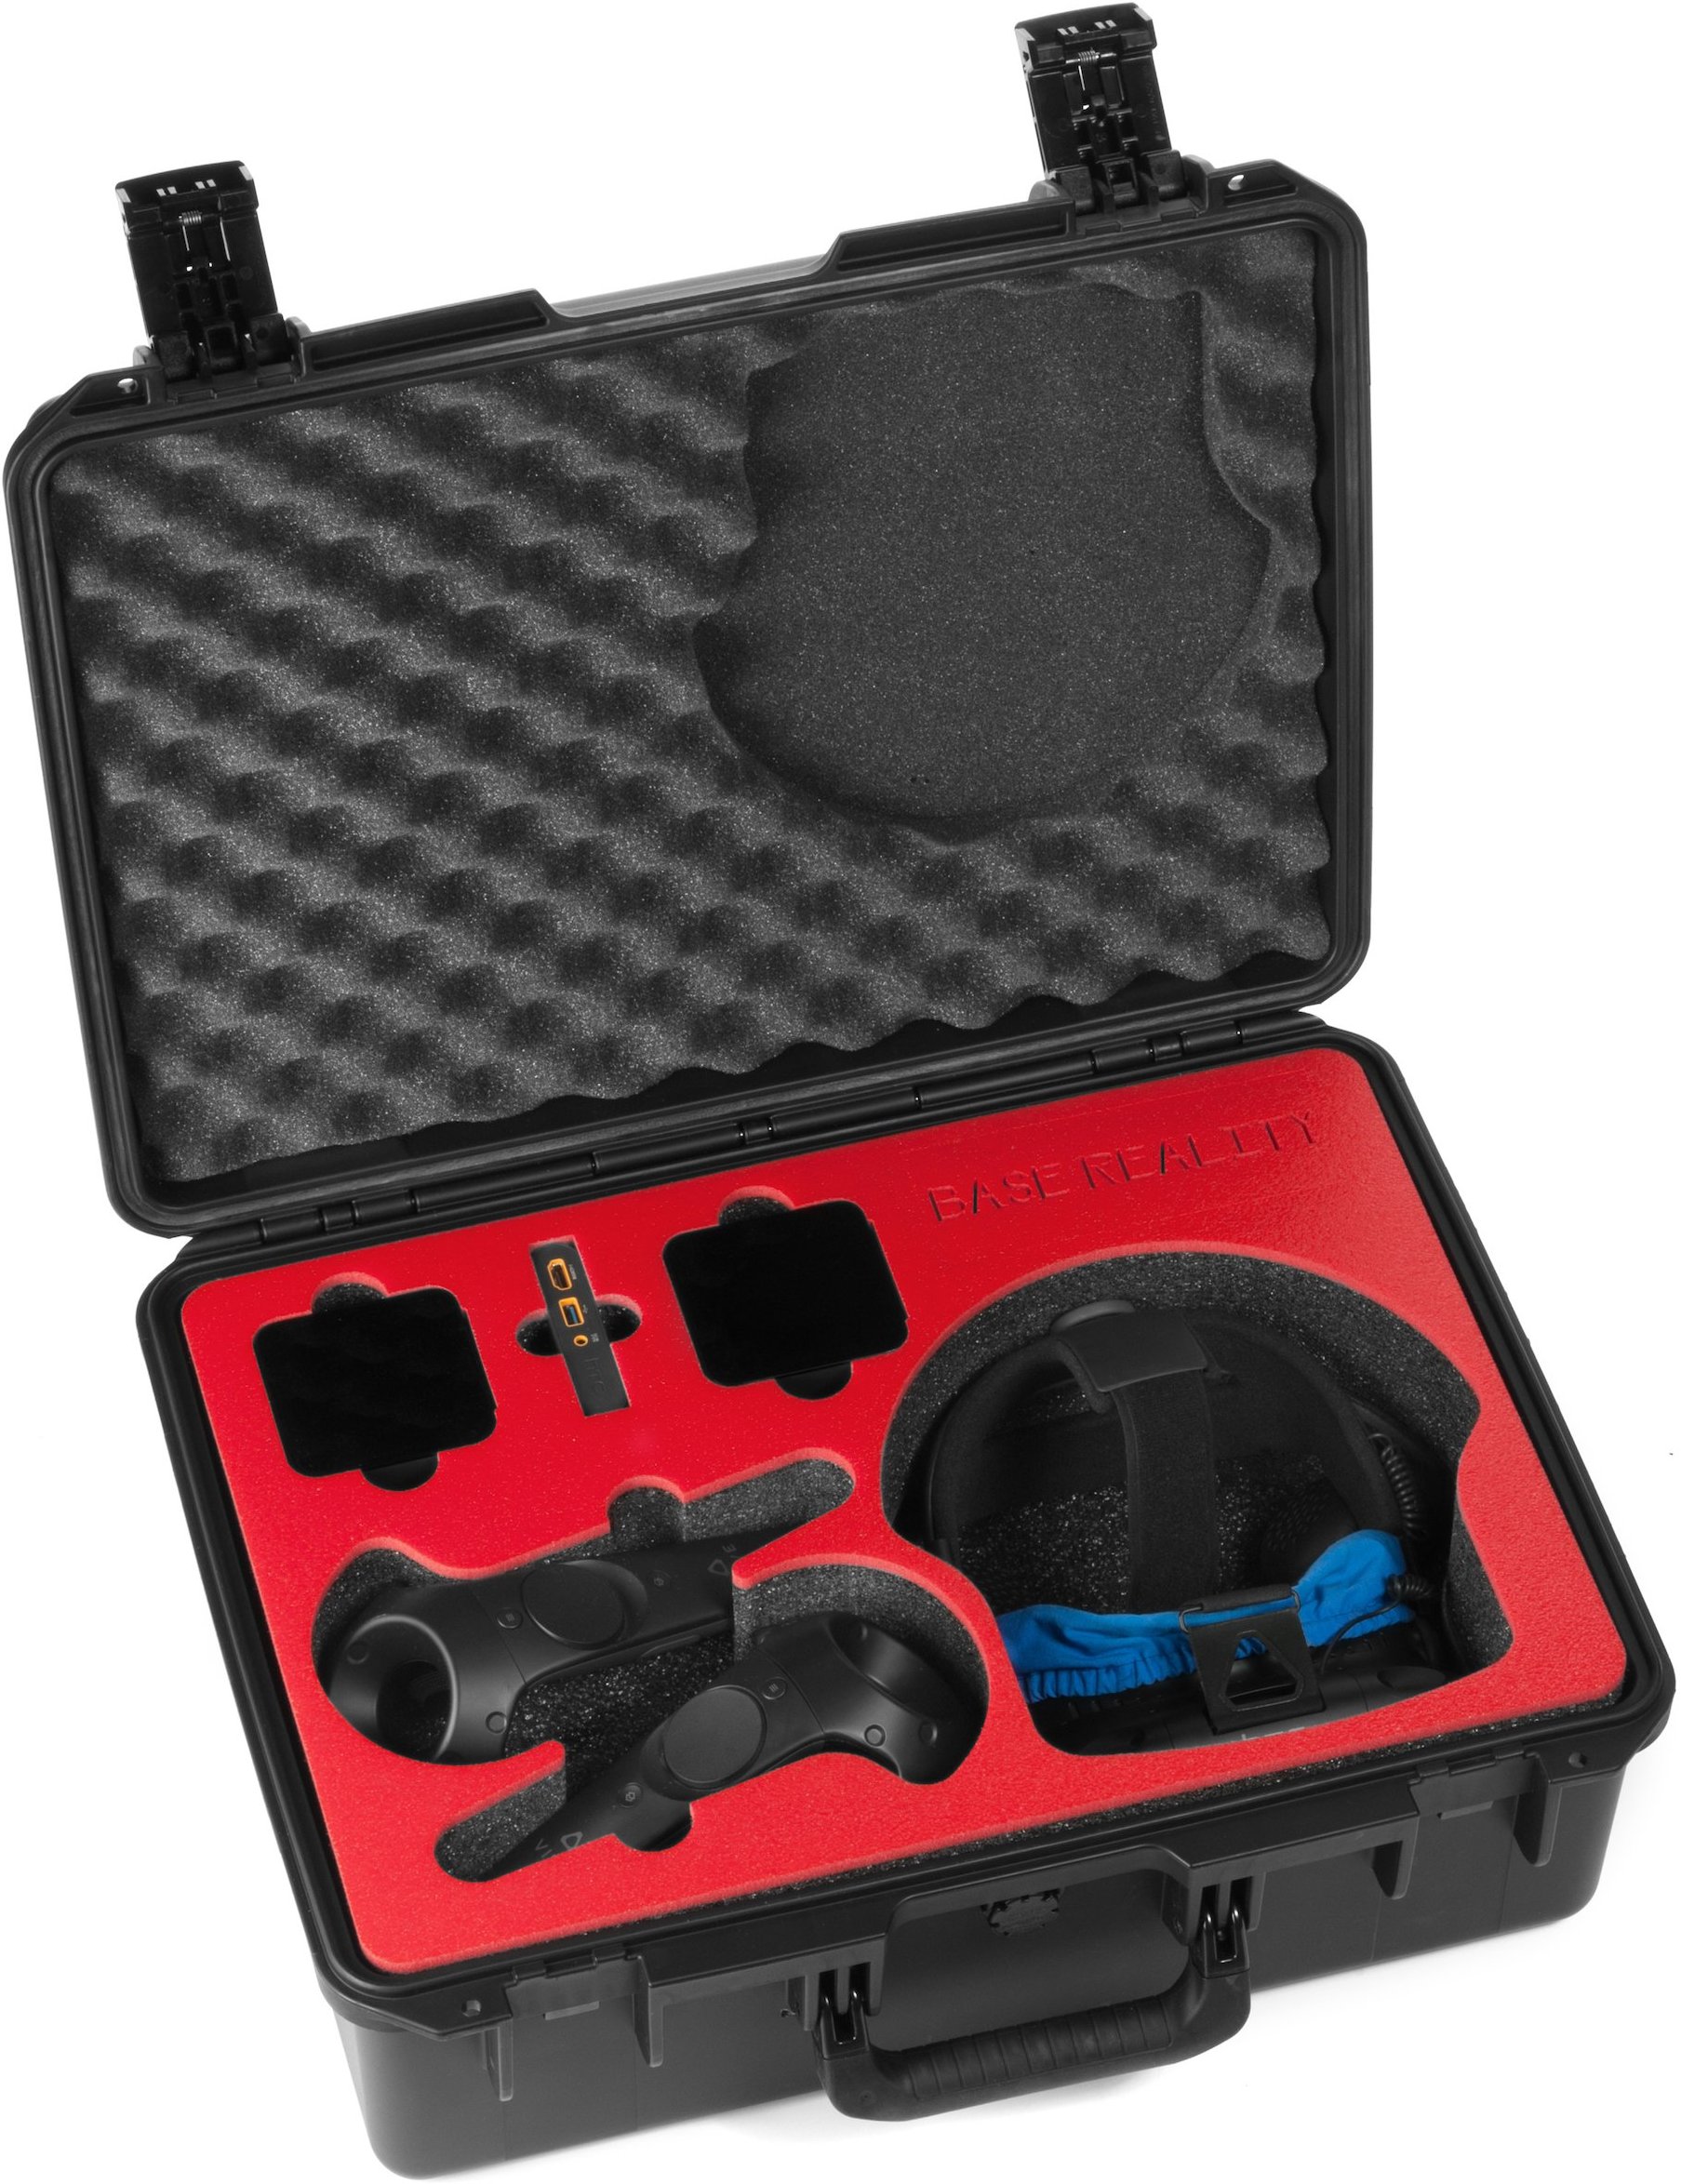 VR system travel and storage case.